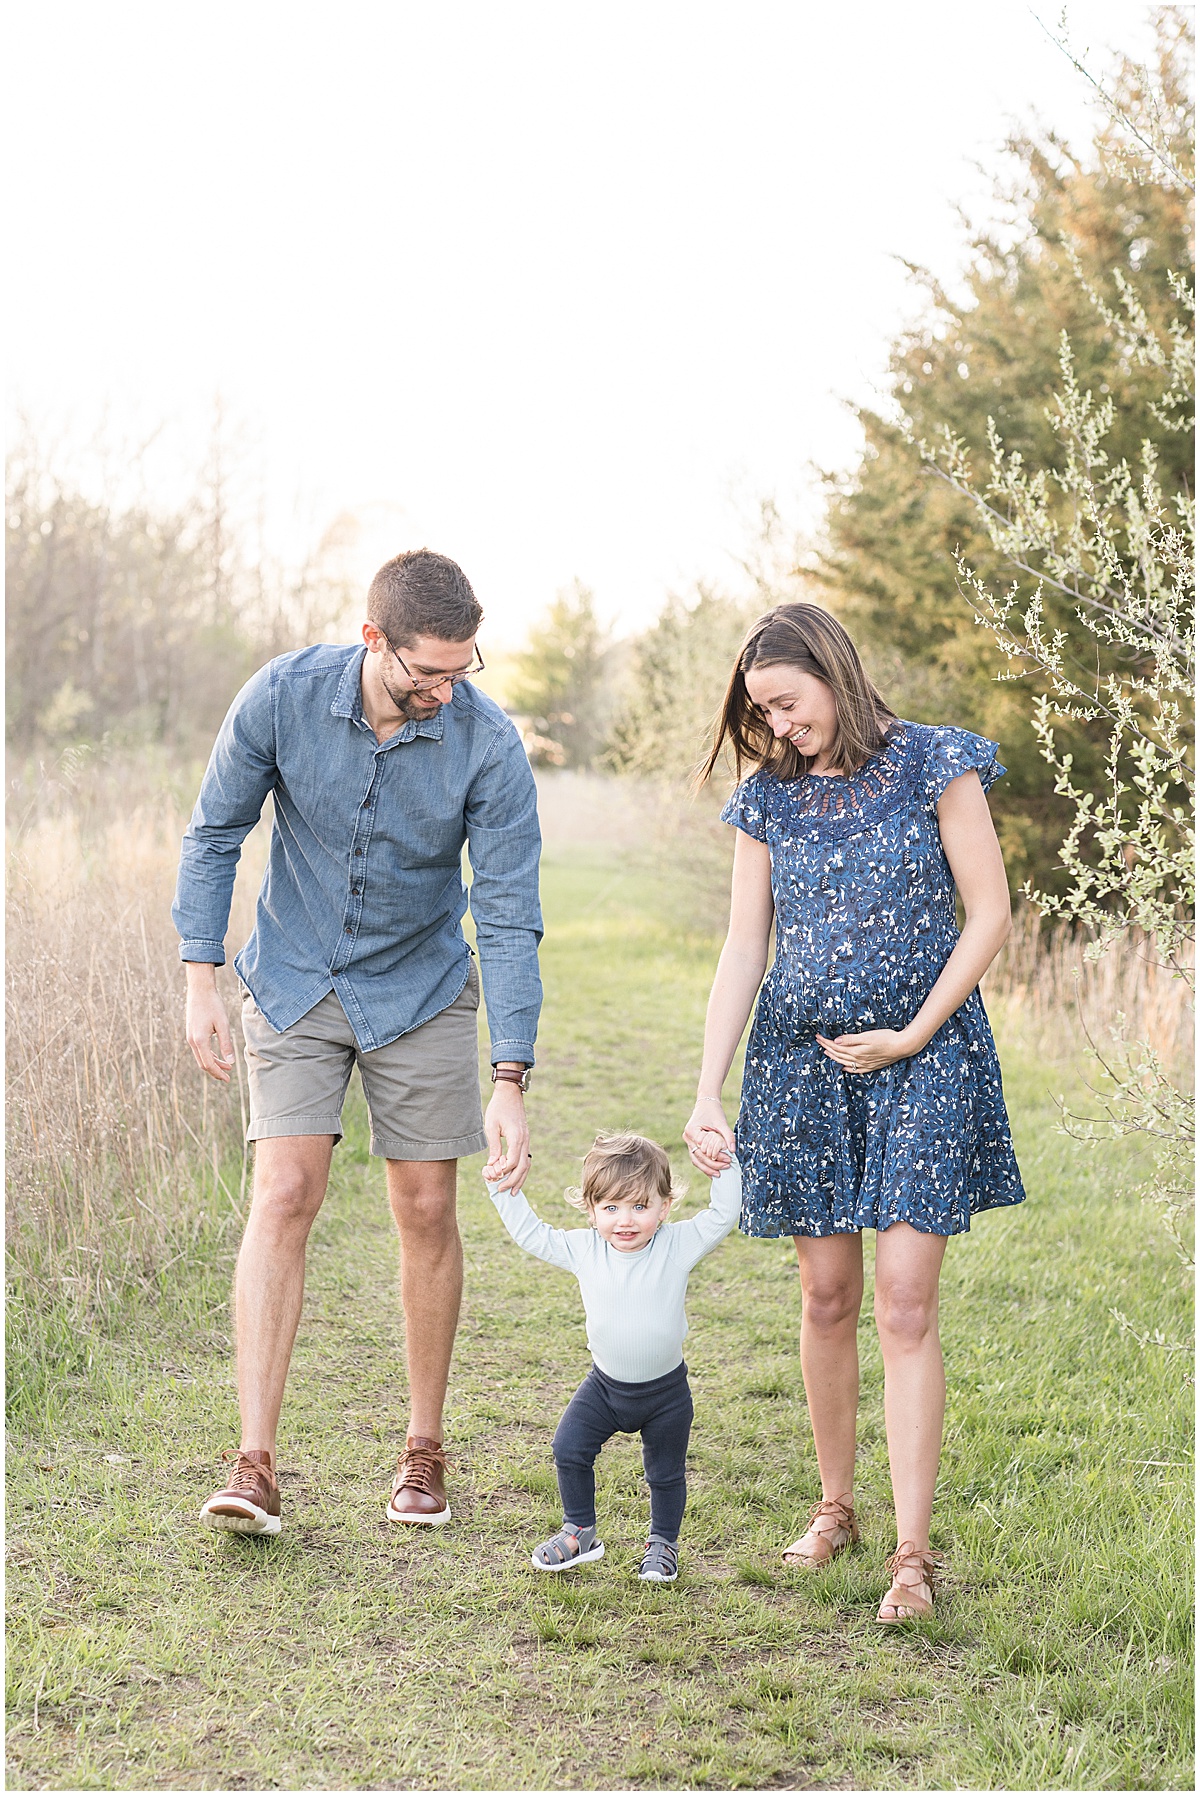 Spring maternity photos at Fairfield Lakes Park in Lafayette, Indiana with toddler